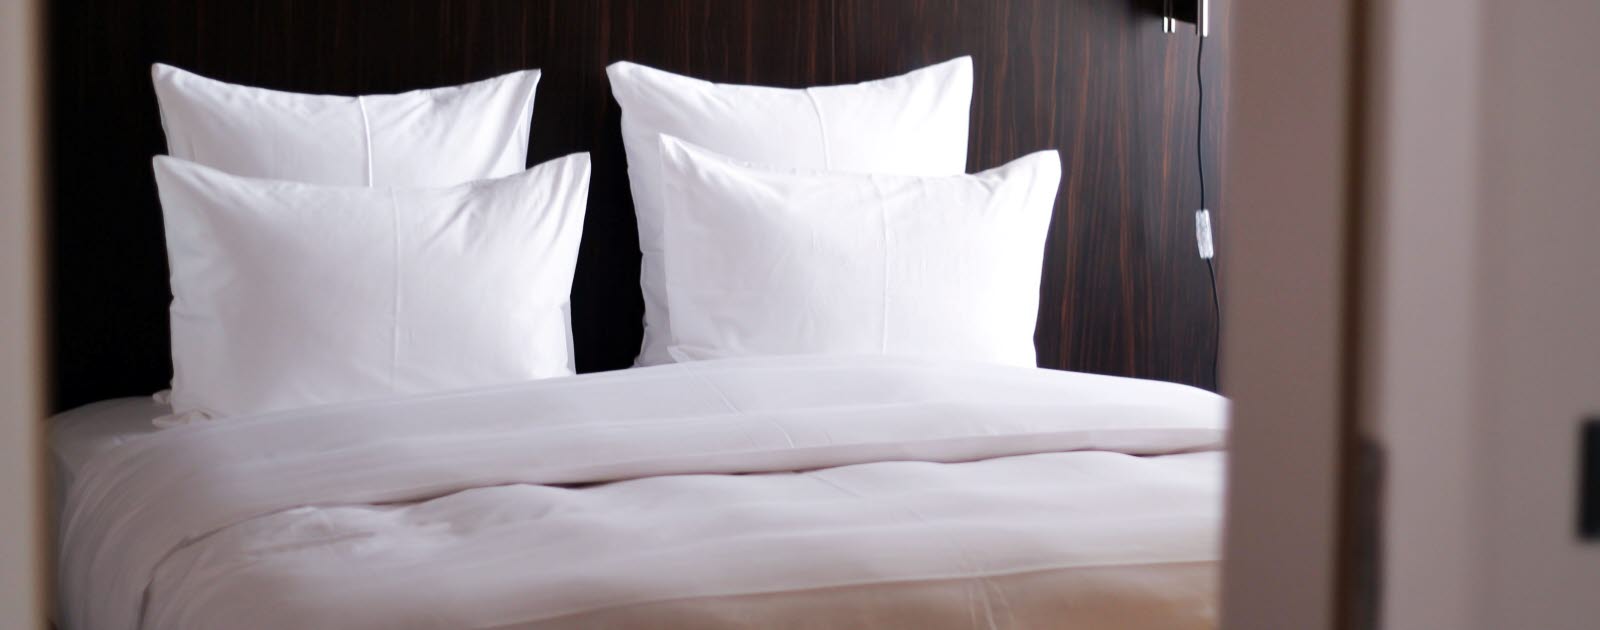 Bed made with white sheets and four pillows.